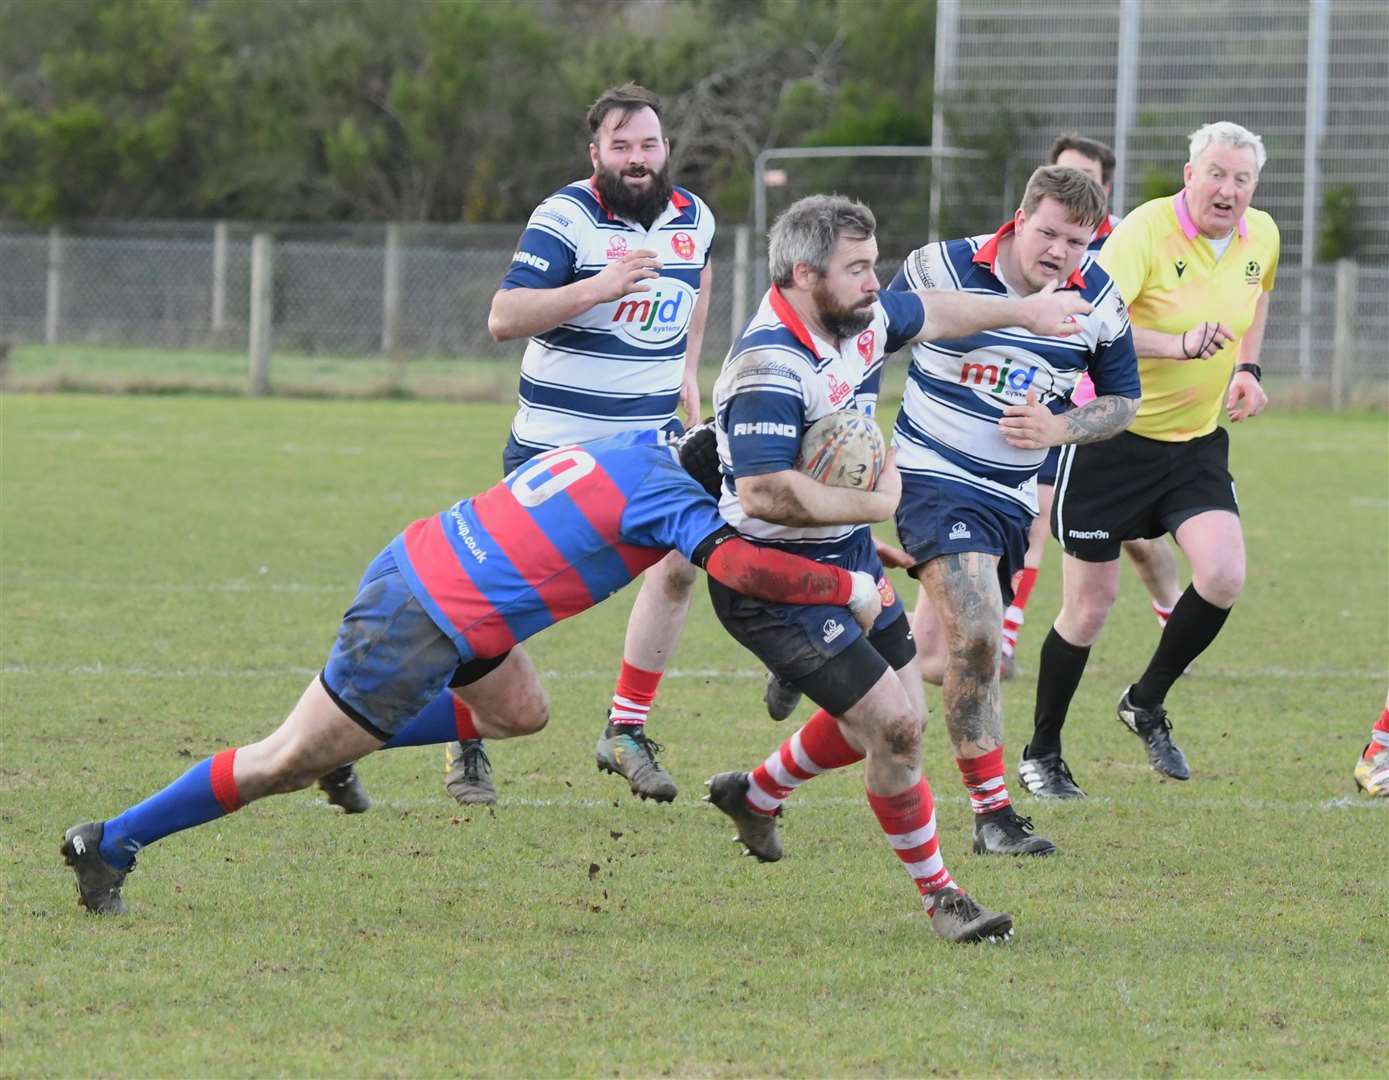 Chris Robottom gets tackled. In the background are Daniel Davidson and Fraser Ireland. Picture: James Officer